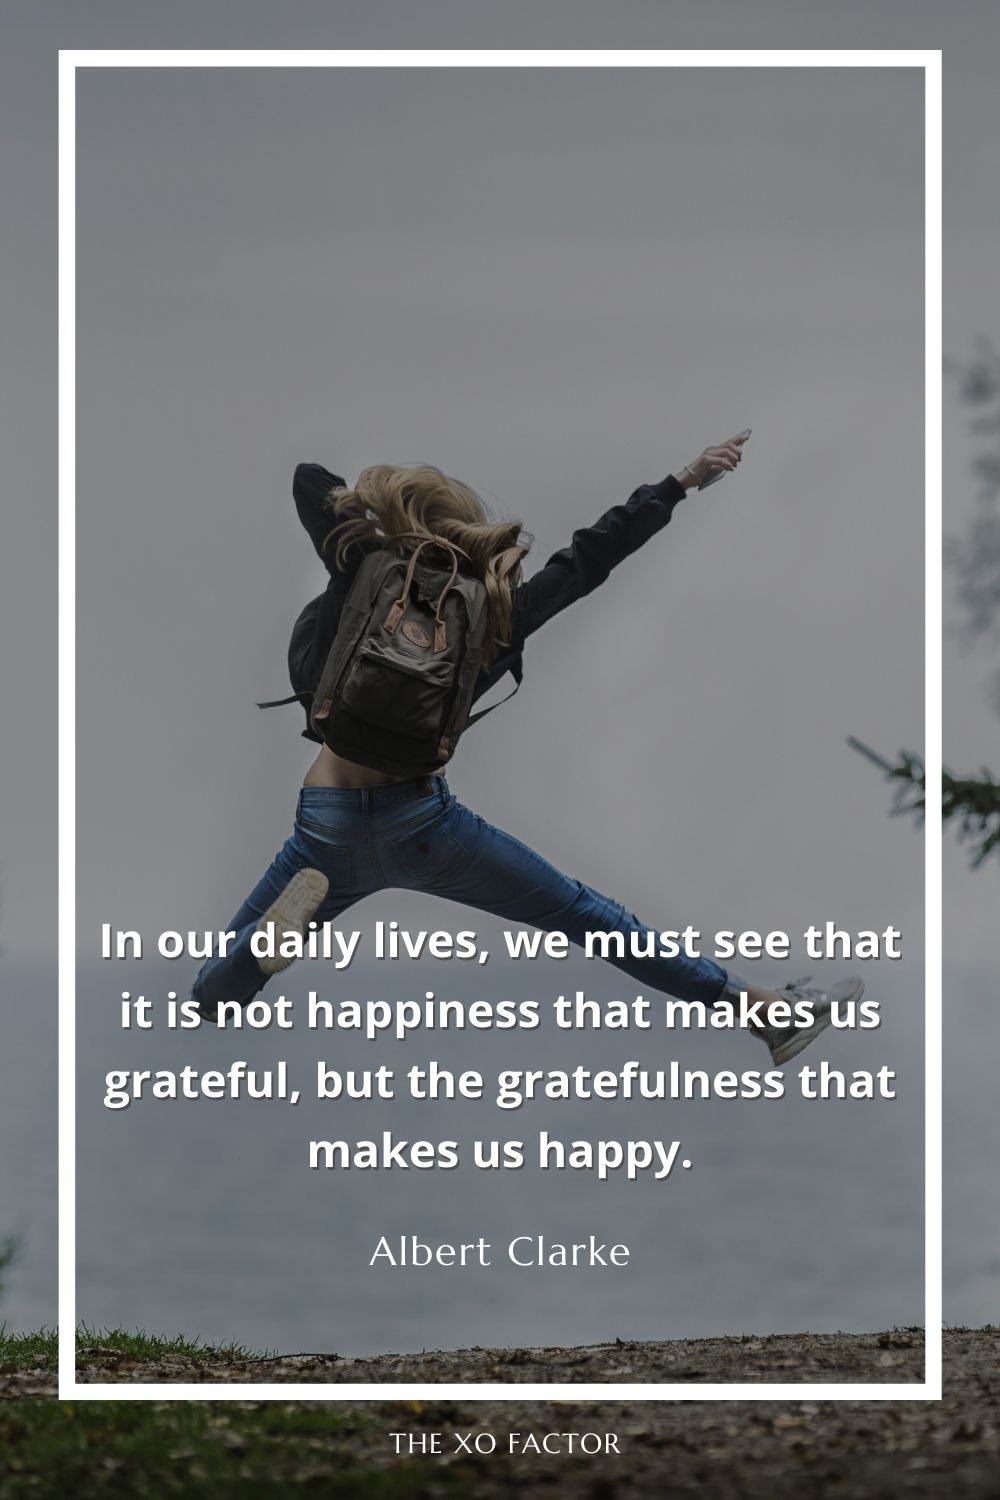 In our daily lives, we must see that it is not happiness that makes us grateful, but the gratefulness that makes us happy.